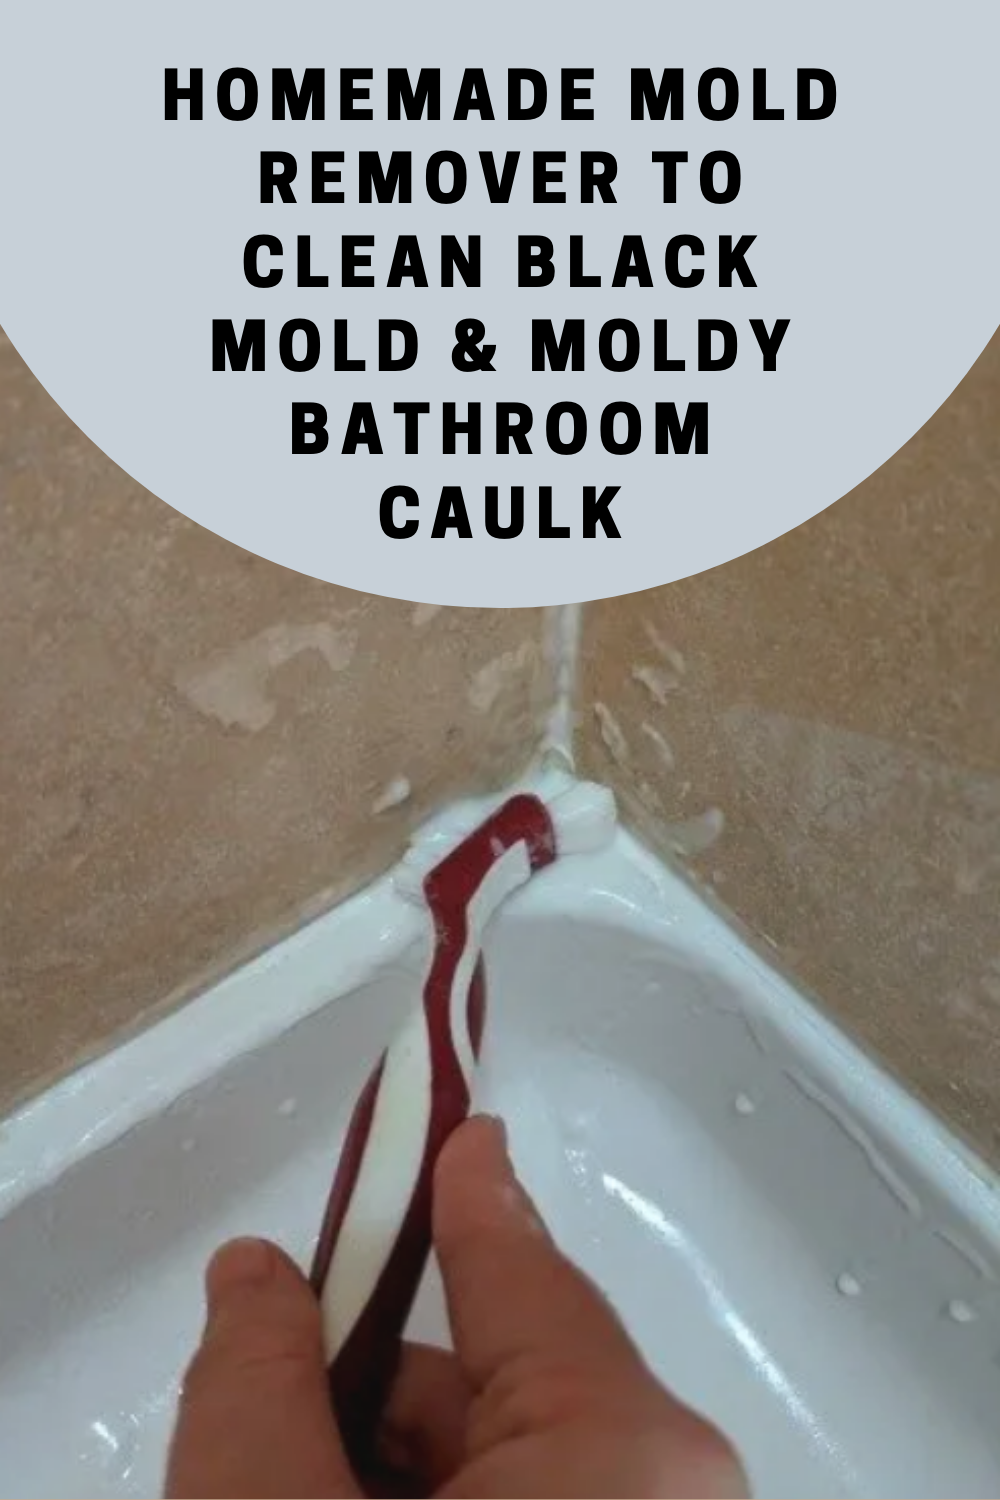 Homemade Mold Remover To Clean Black And Moldy Bathroom ...